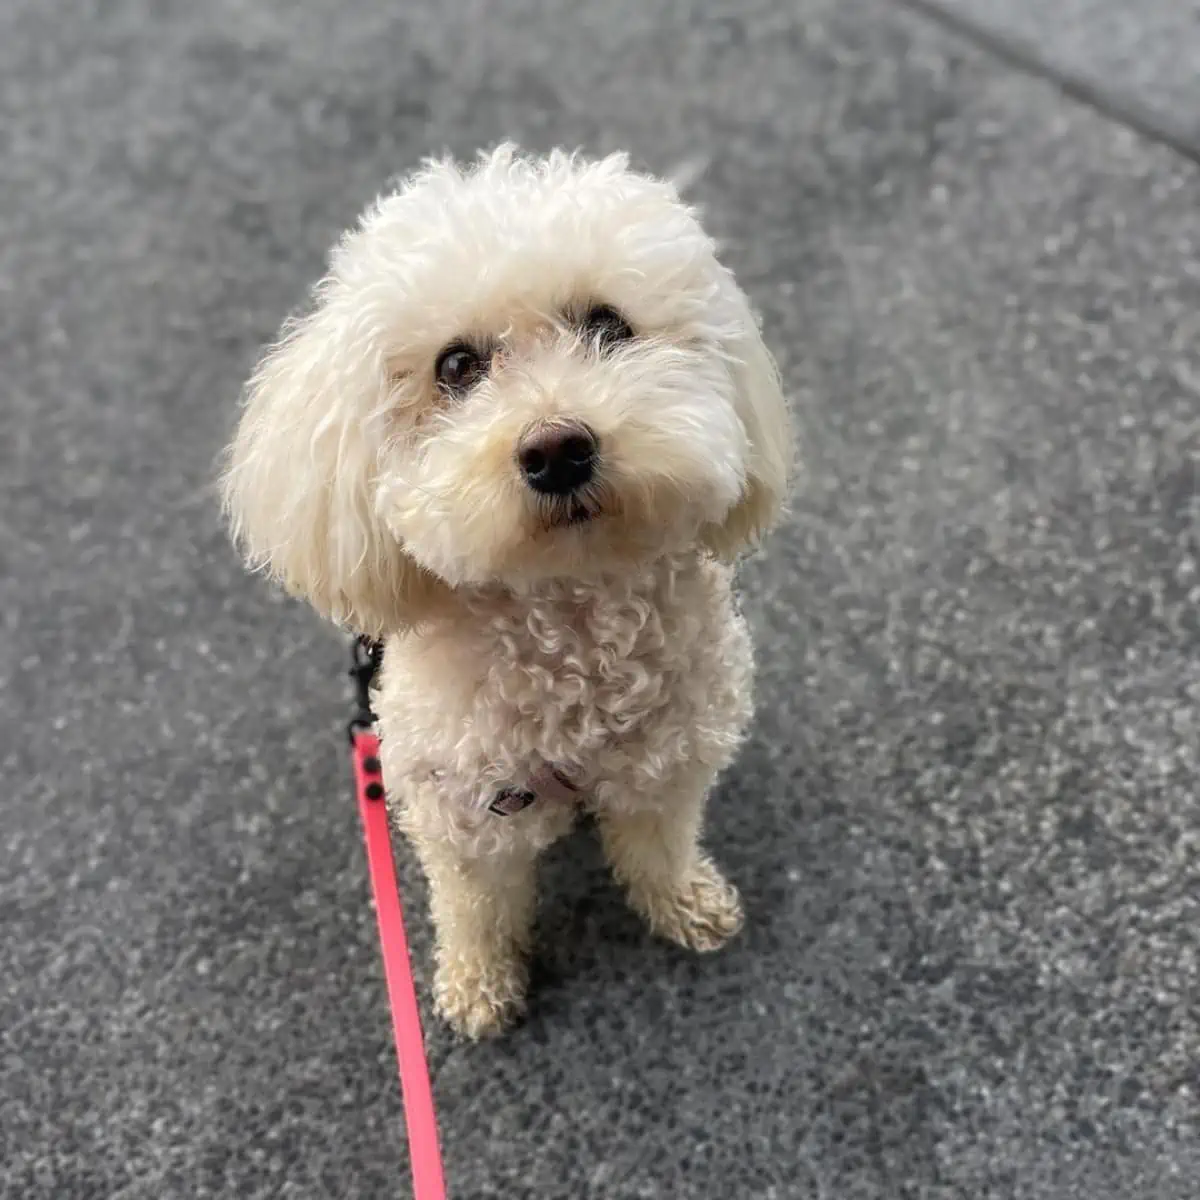 Toy Poodle ready for a walk